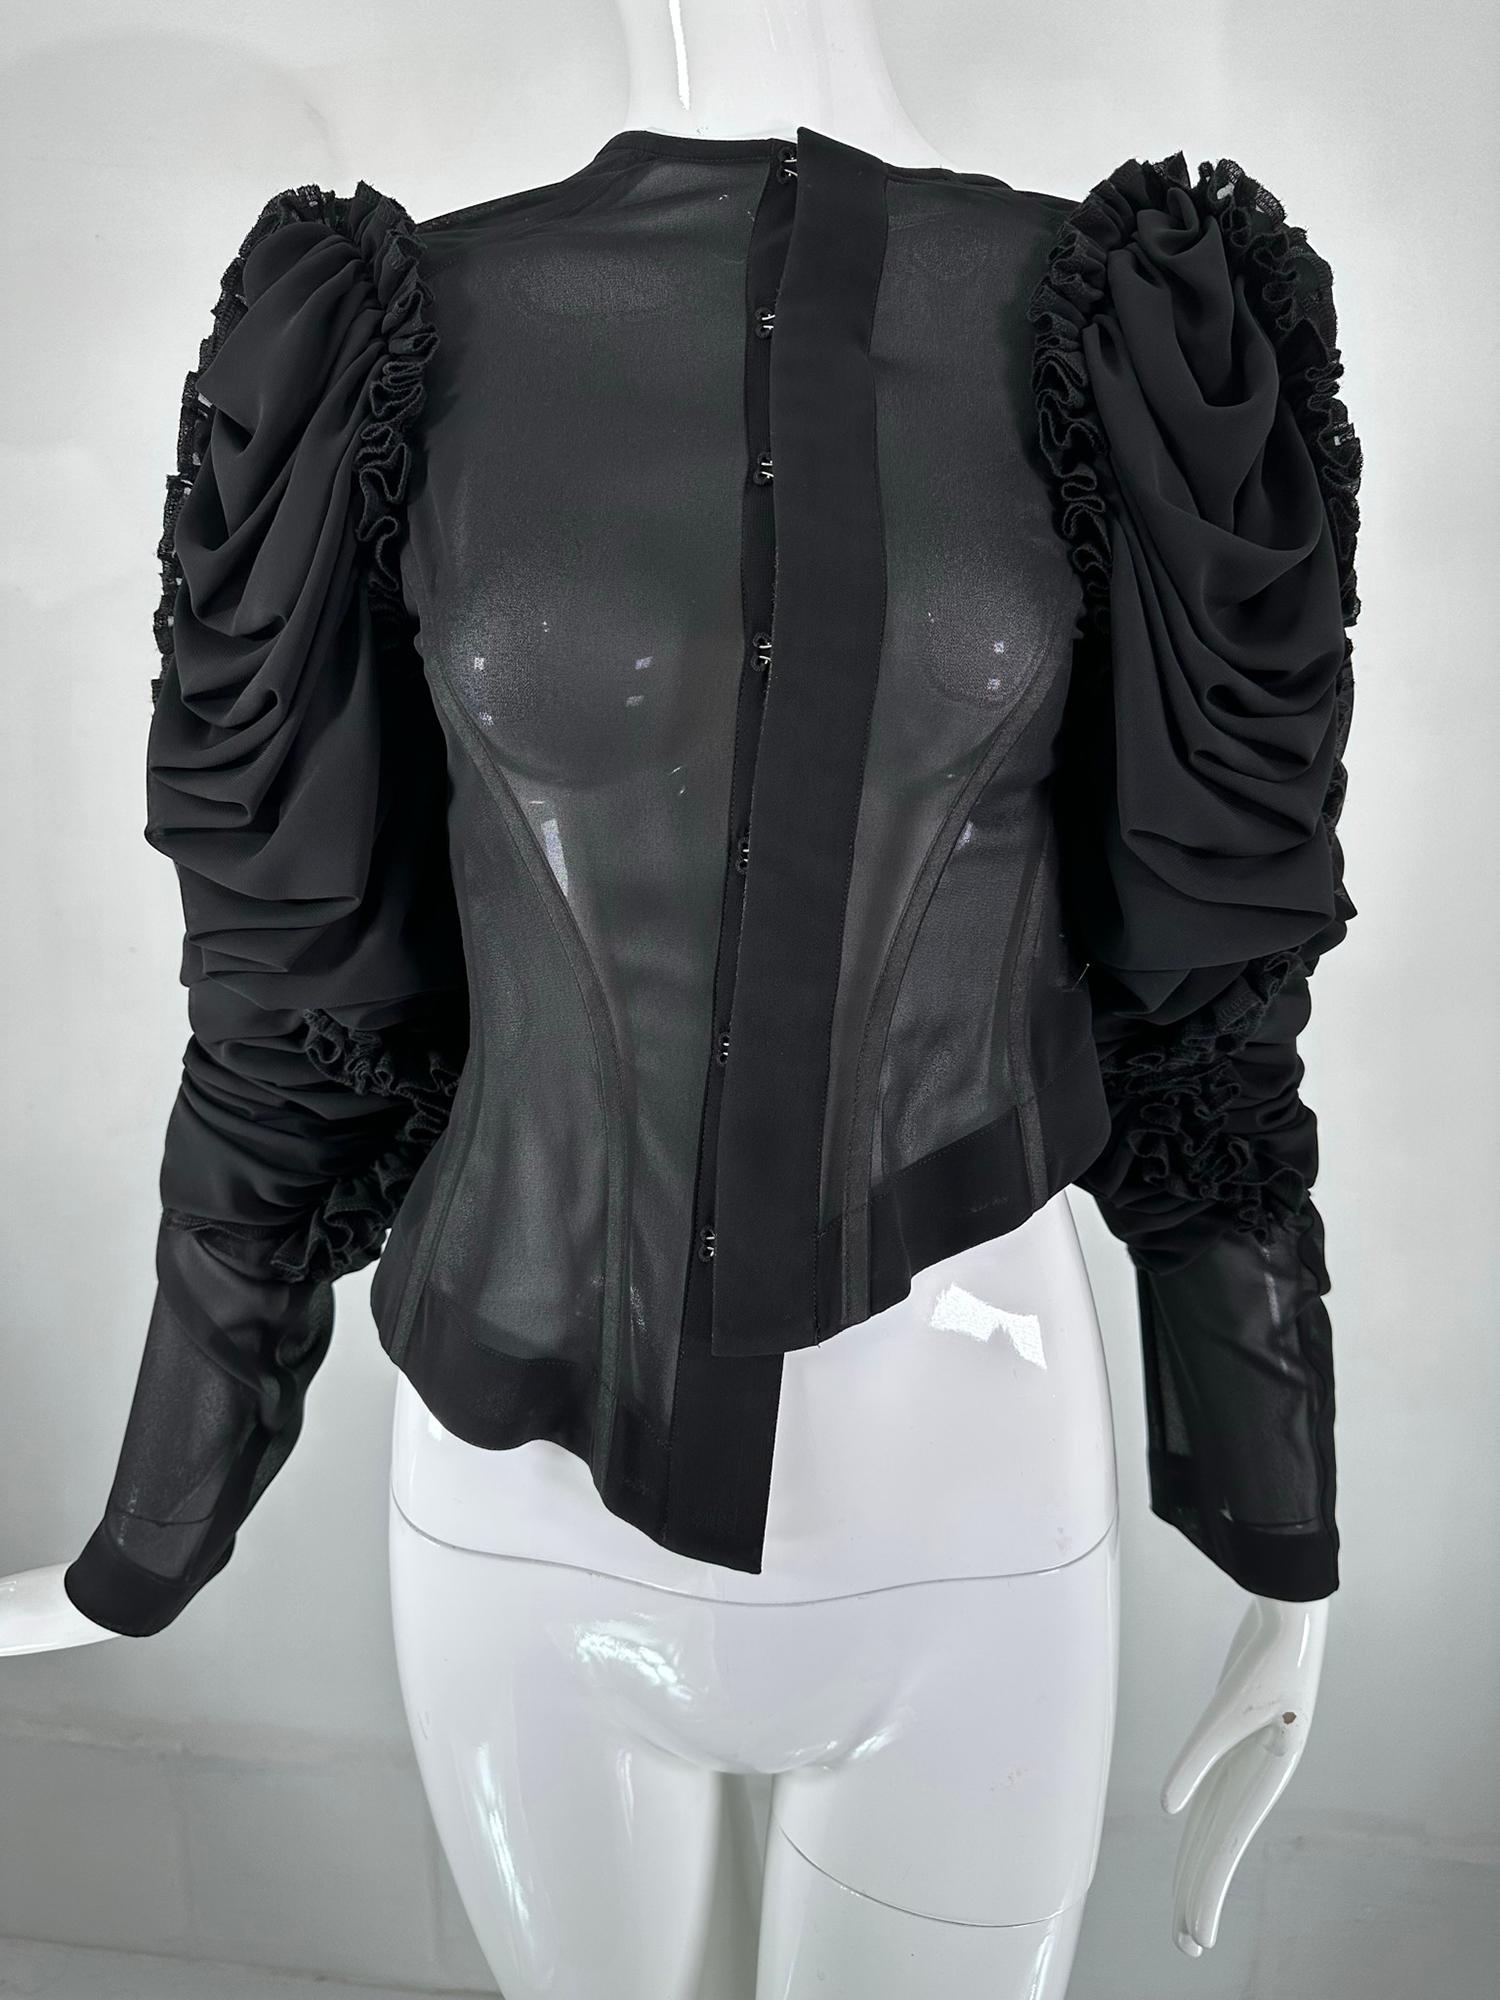 Comme Des Garcons black sheer polyester chiffon, draped balloon Sleeve top 2004. Asymmetrical hem bodice has off white taped seams, the top closes with hook & eyes the facings are taped in off white. There are over sleeves which are very full &